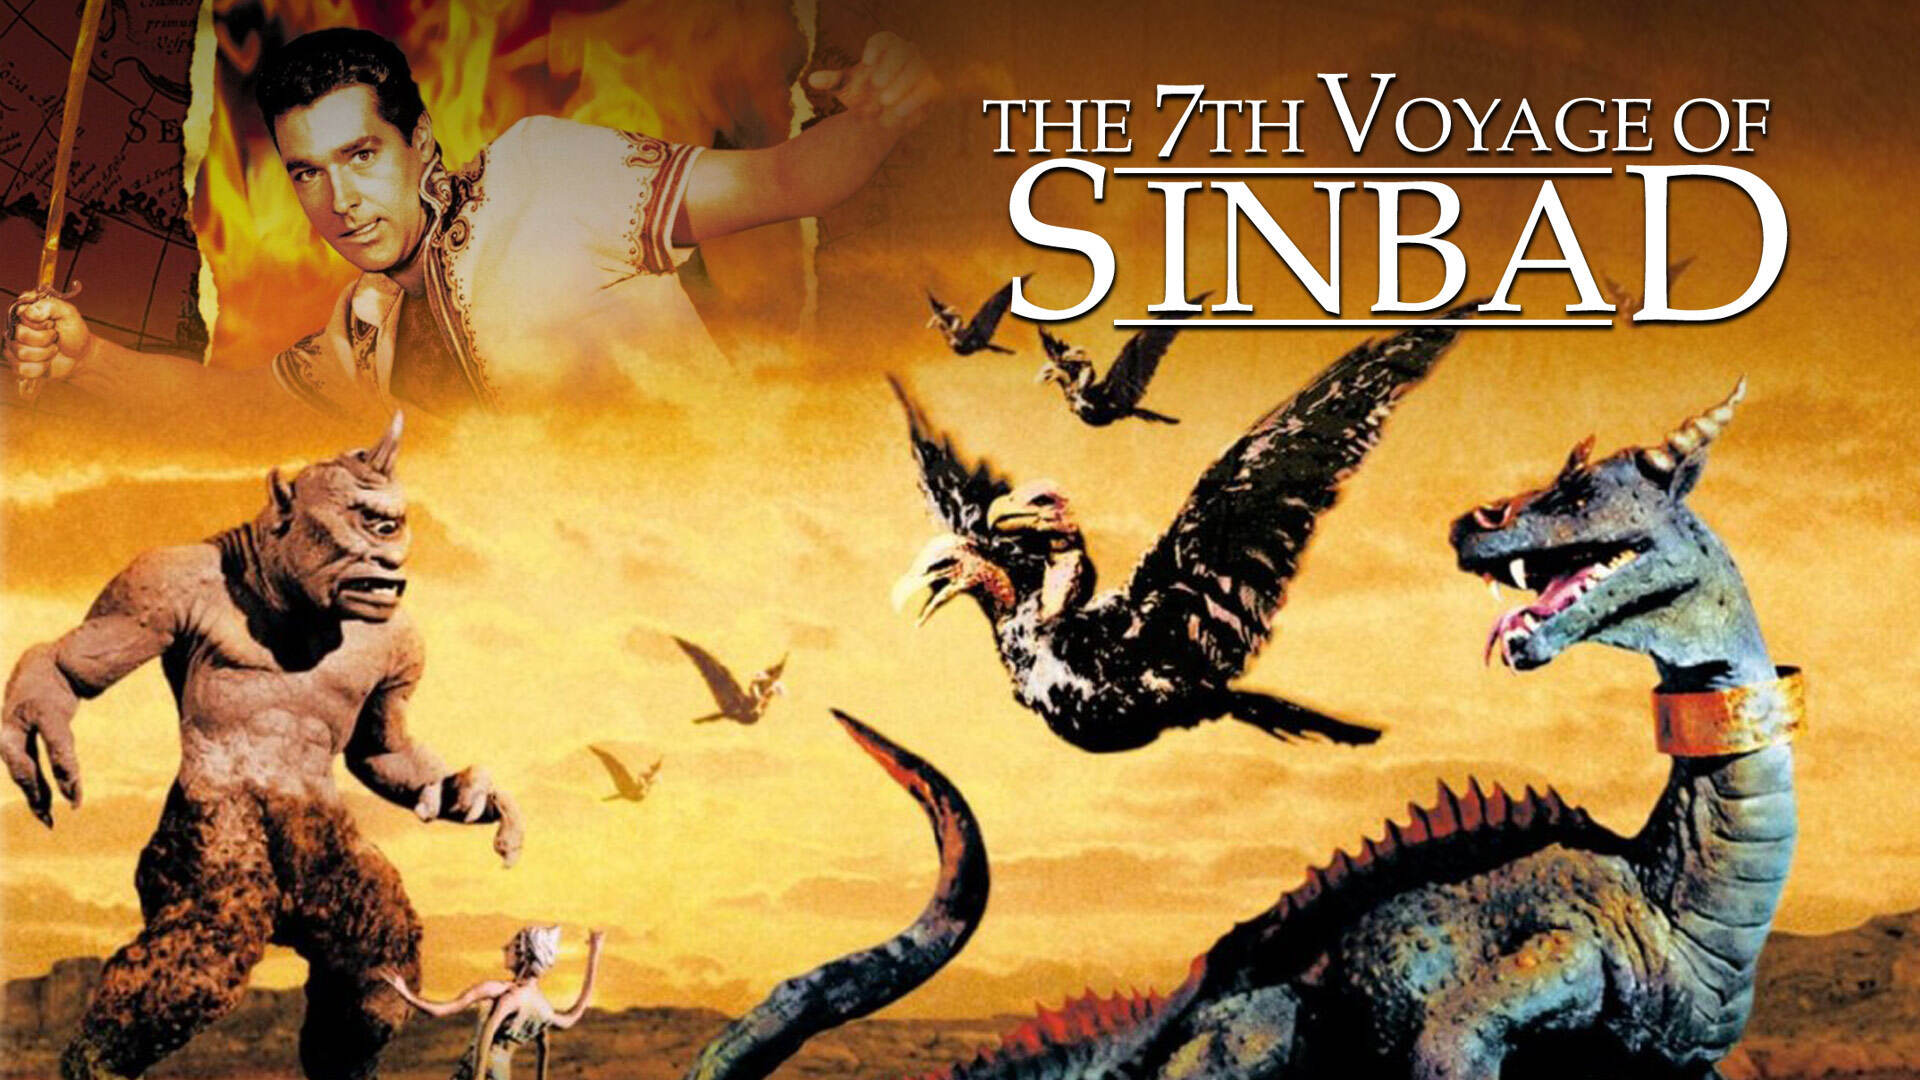 38-facts-about-the-movie-the-7th-voyage-of-sinbad